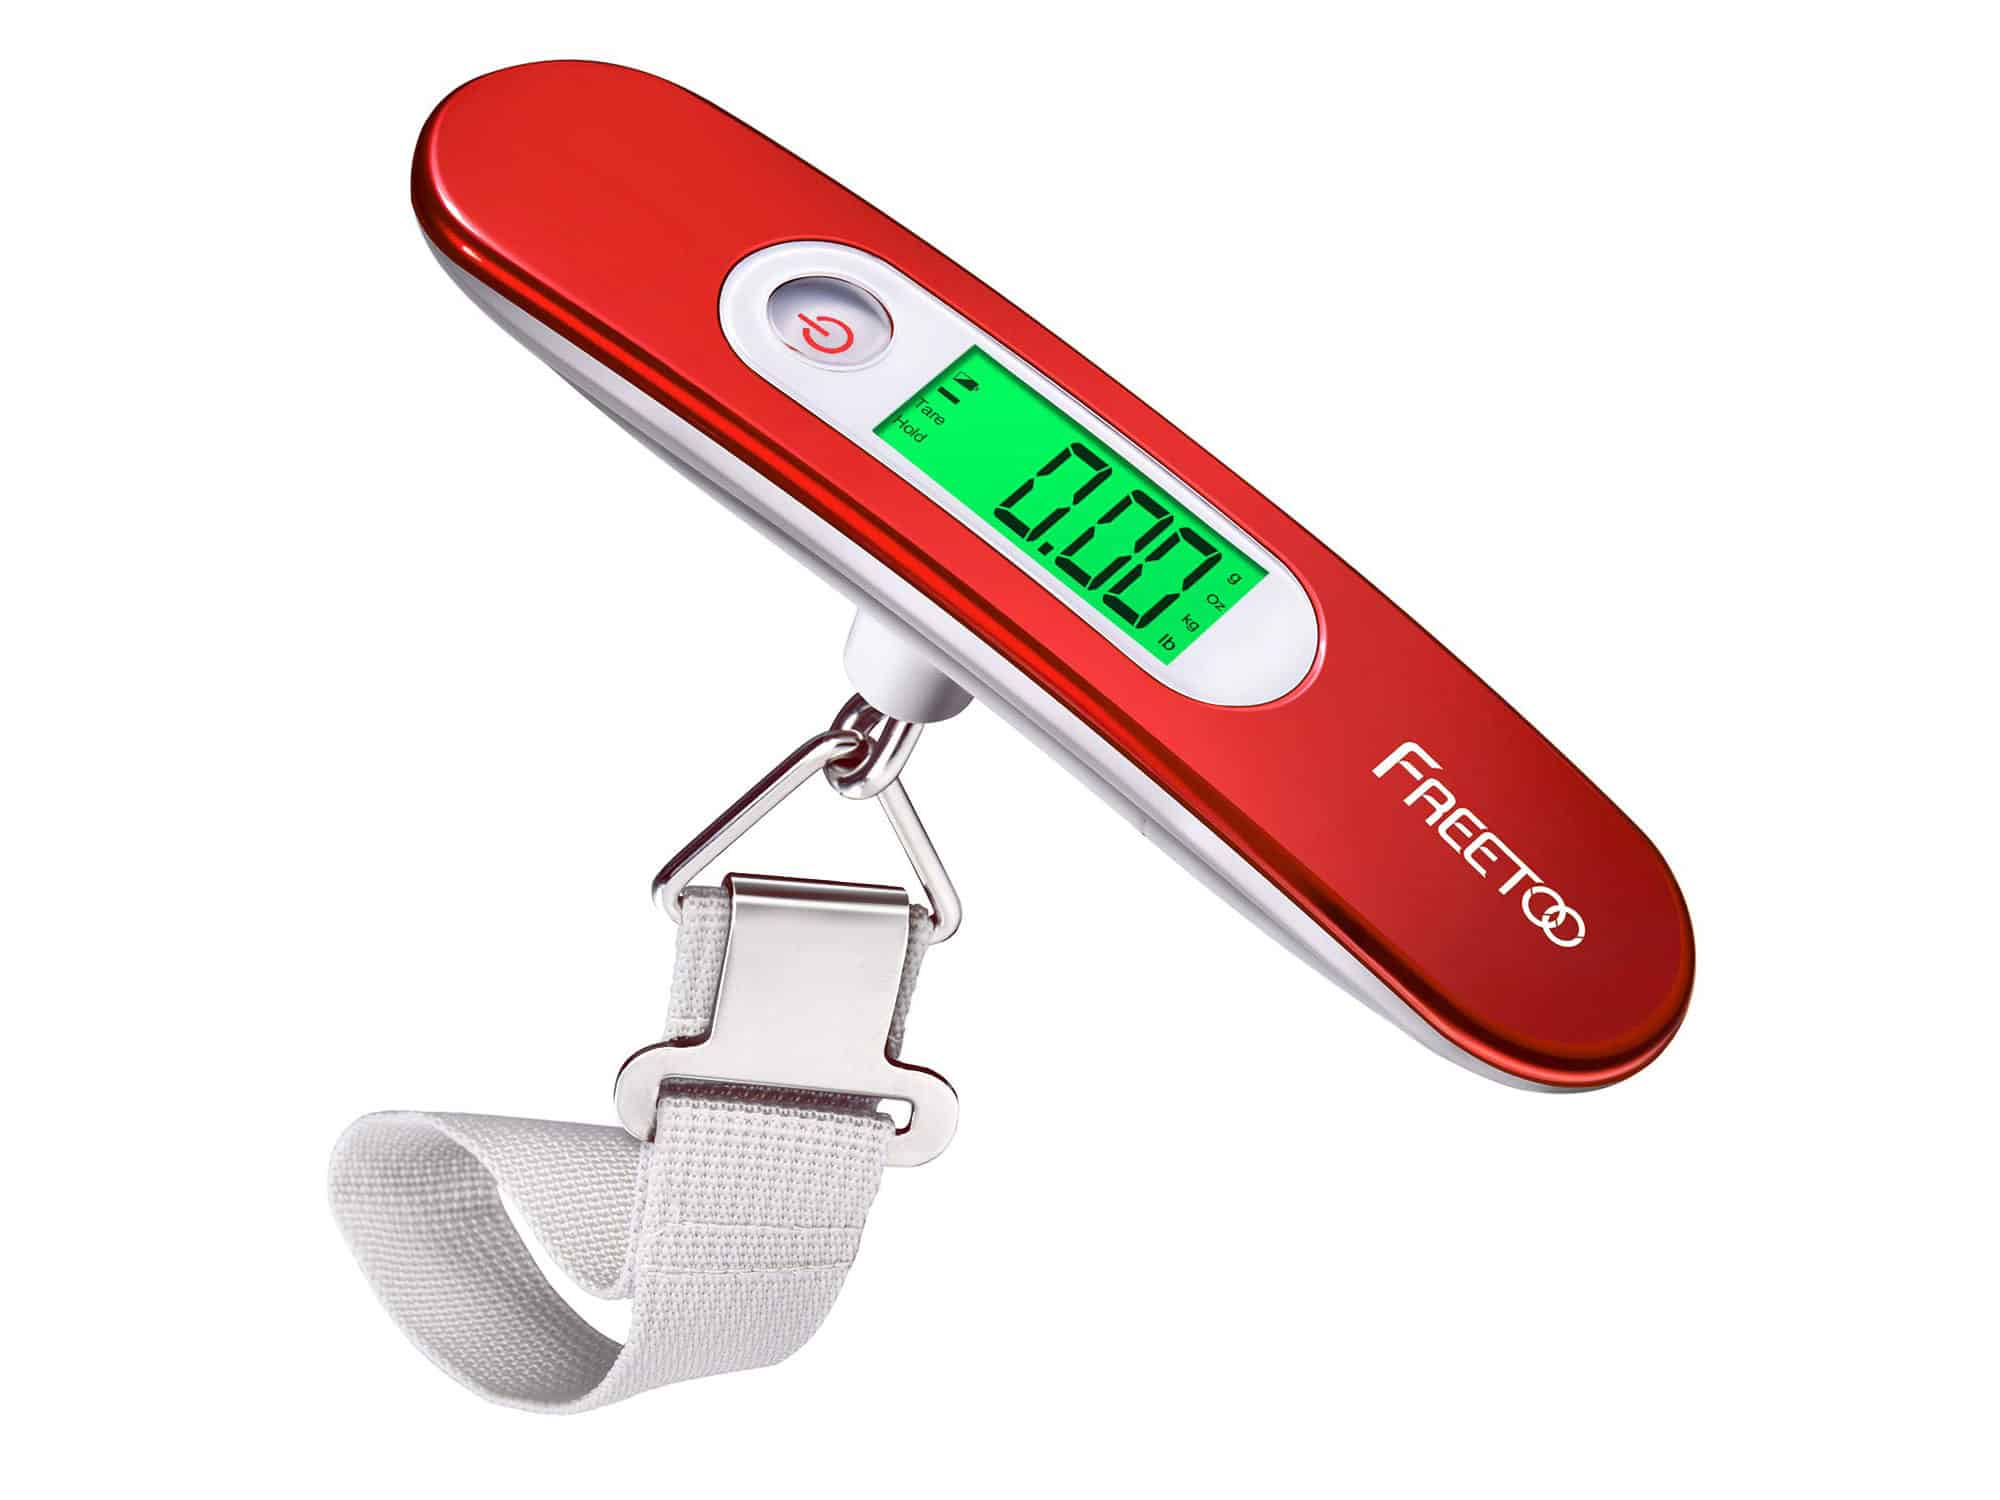 FREETOO Luggage Scale Portable Digital Hanging Scale for Travel, Suitcase Weight Scale with Superior Piano Lacquer 110 Lb./ 50Kg Capacity, Battery Included